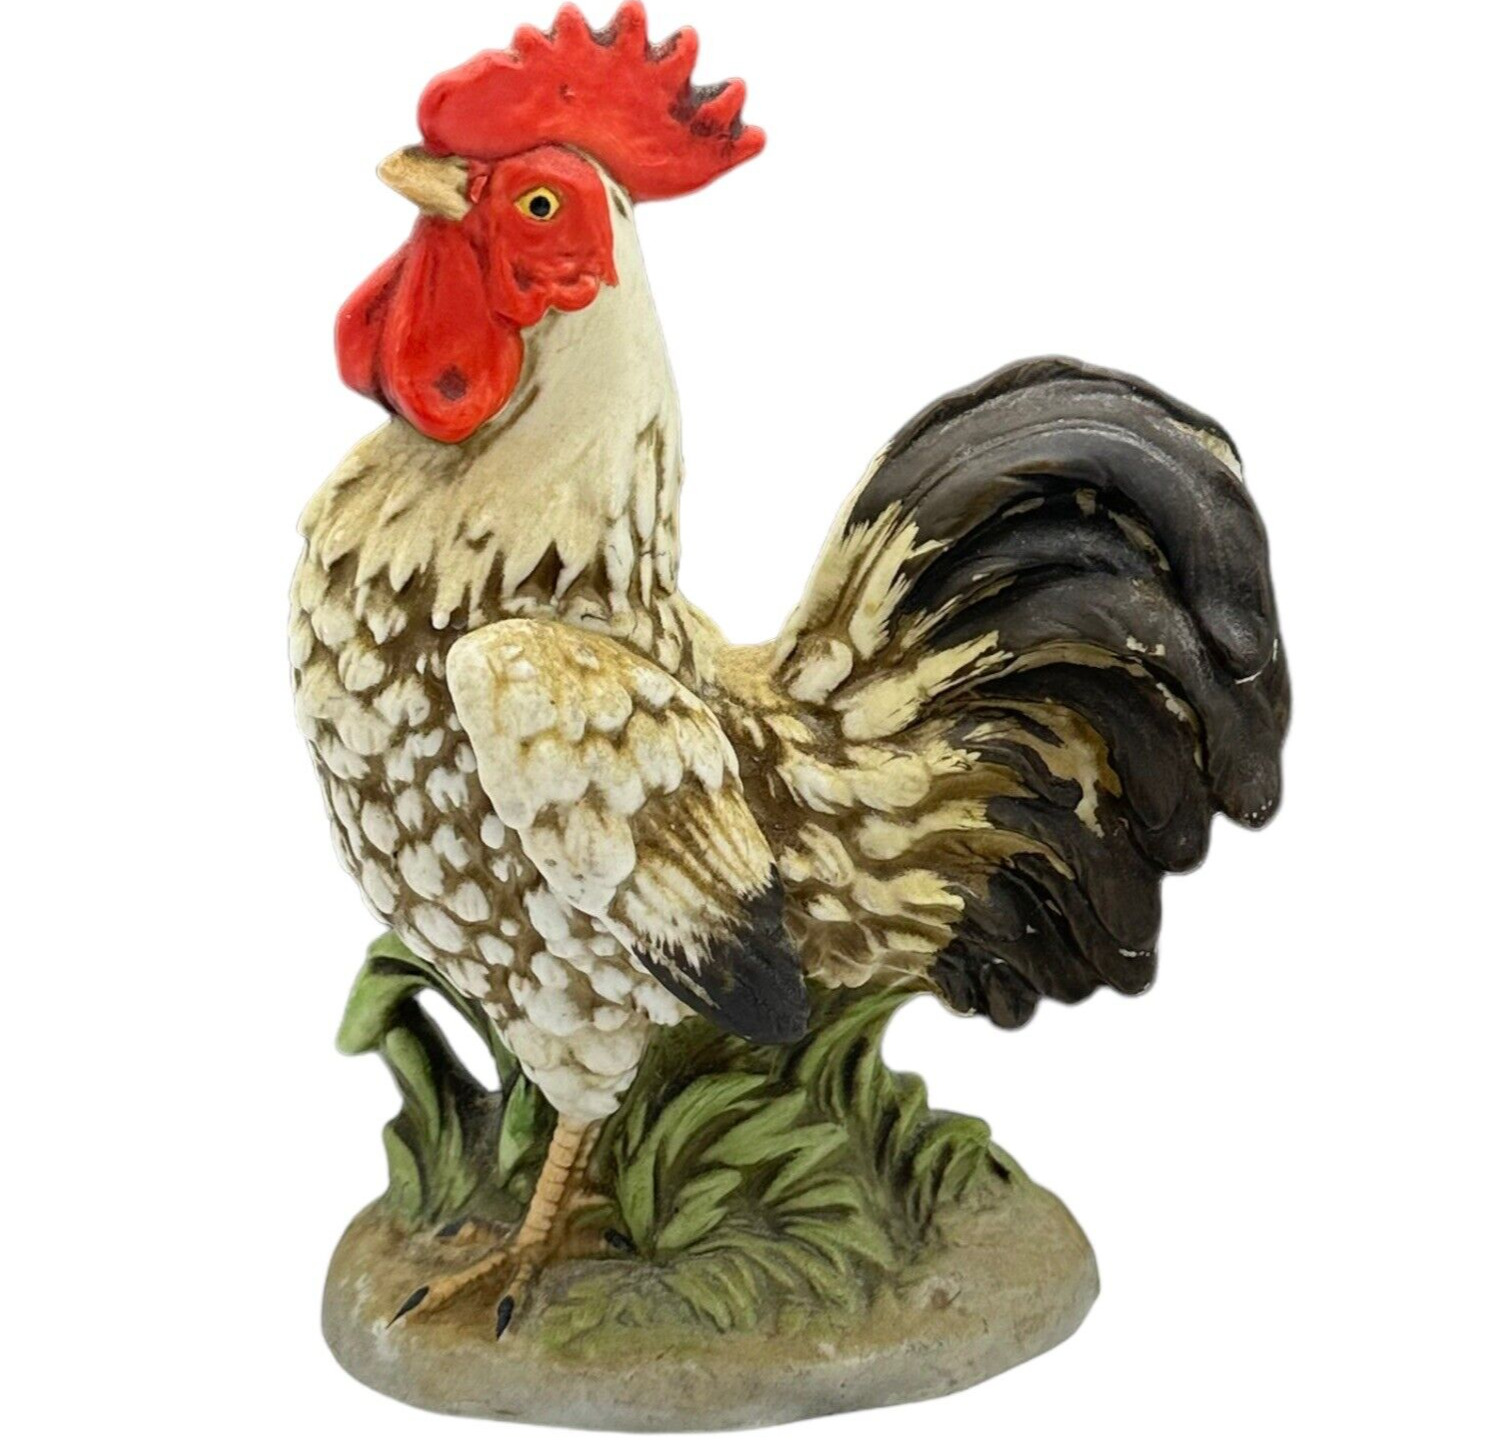 HOMCO Rooster Chicken Figurine 1446 Porcelain 6.5